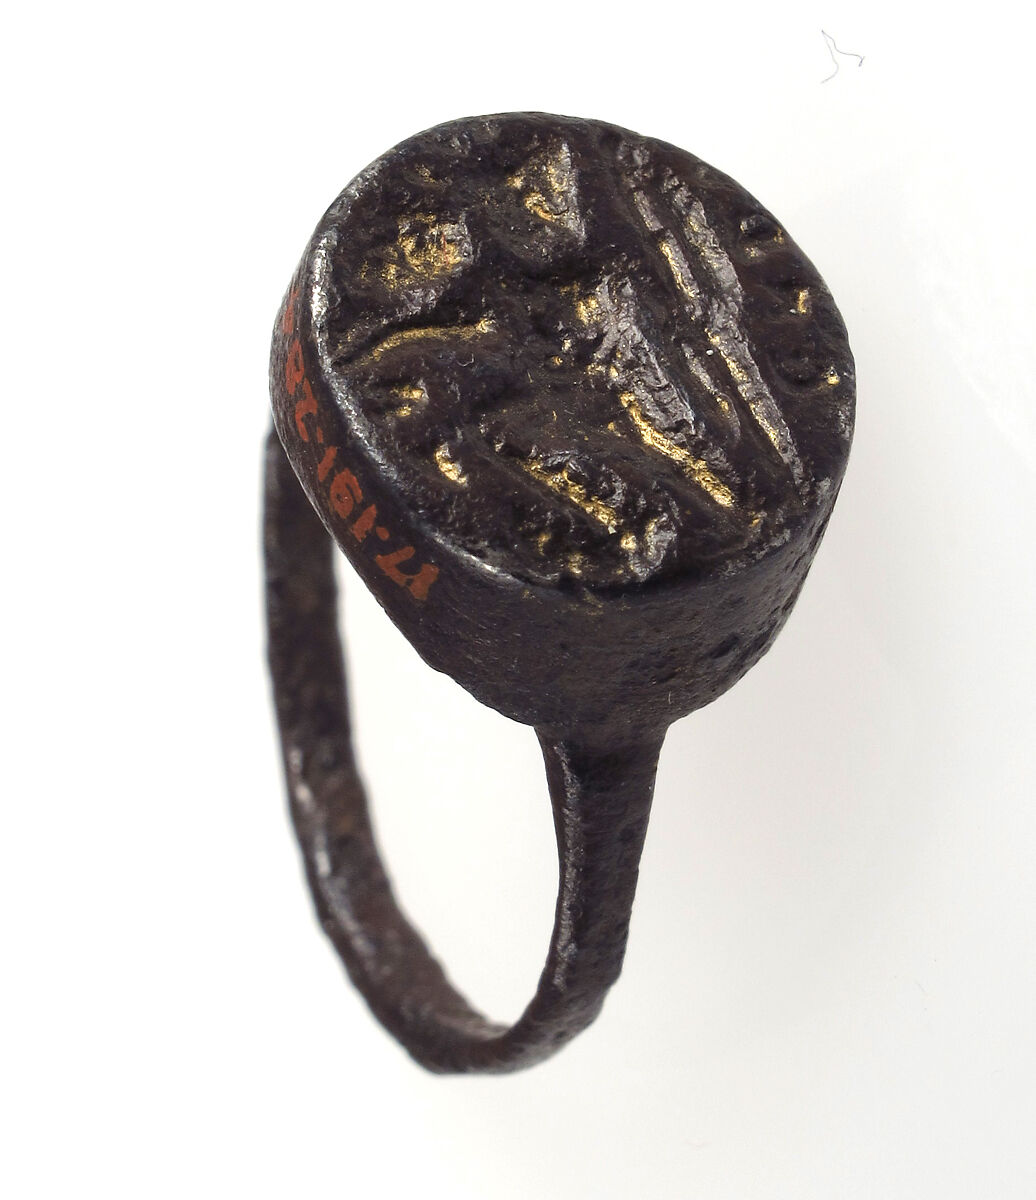 Finger Ring, Copper alloy, traces of gilding (?), Roman 